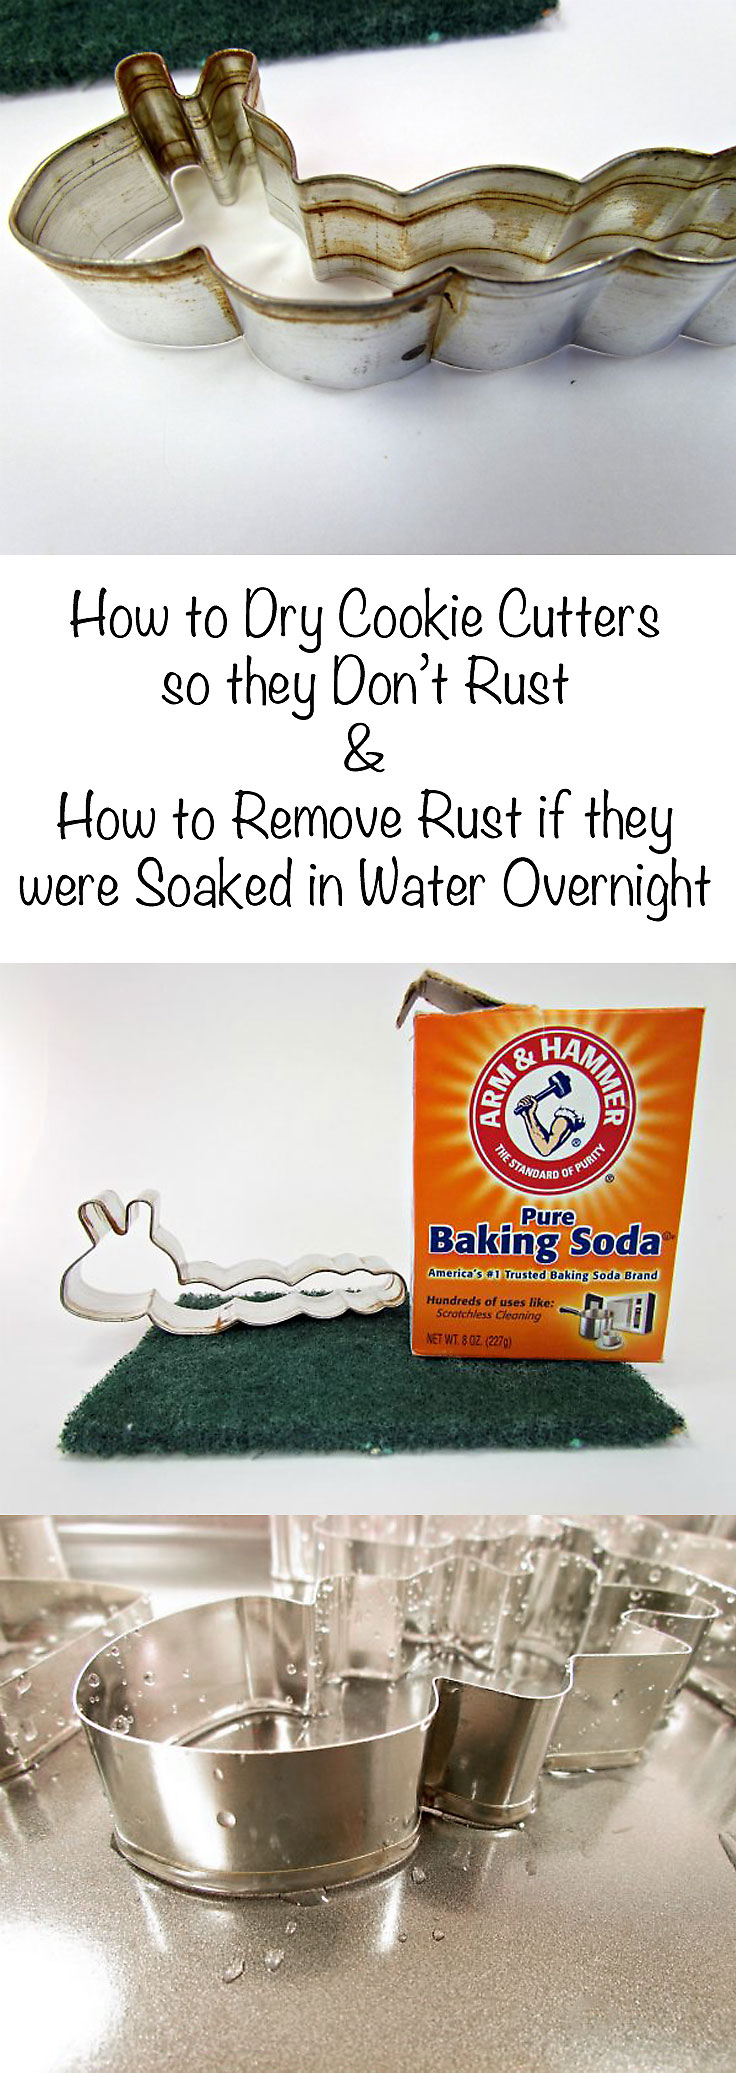 How to Dry Cookie Cutters and How to Remove Rust if they were Soaked in Water Overnight by www.thebearfootbaker.com